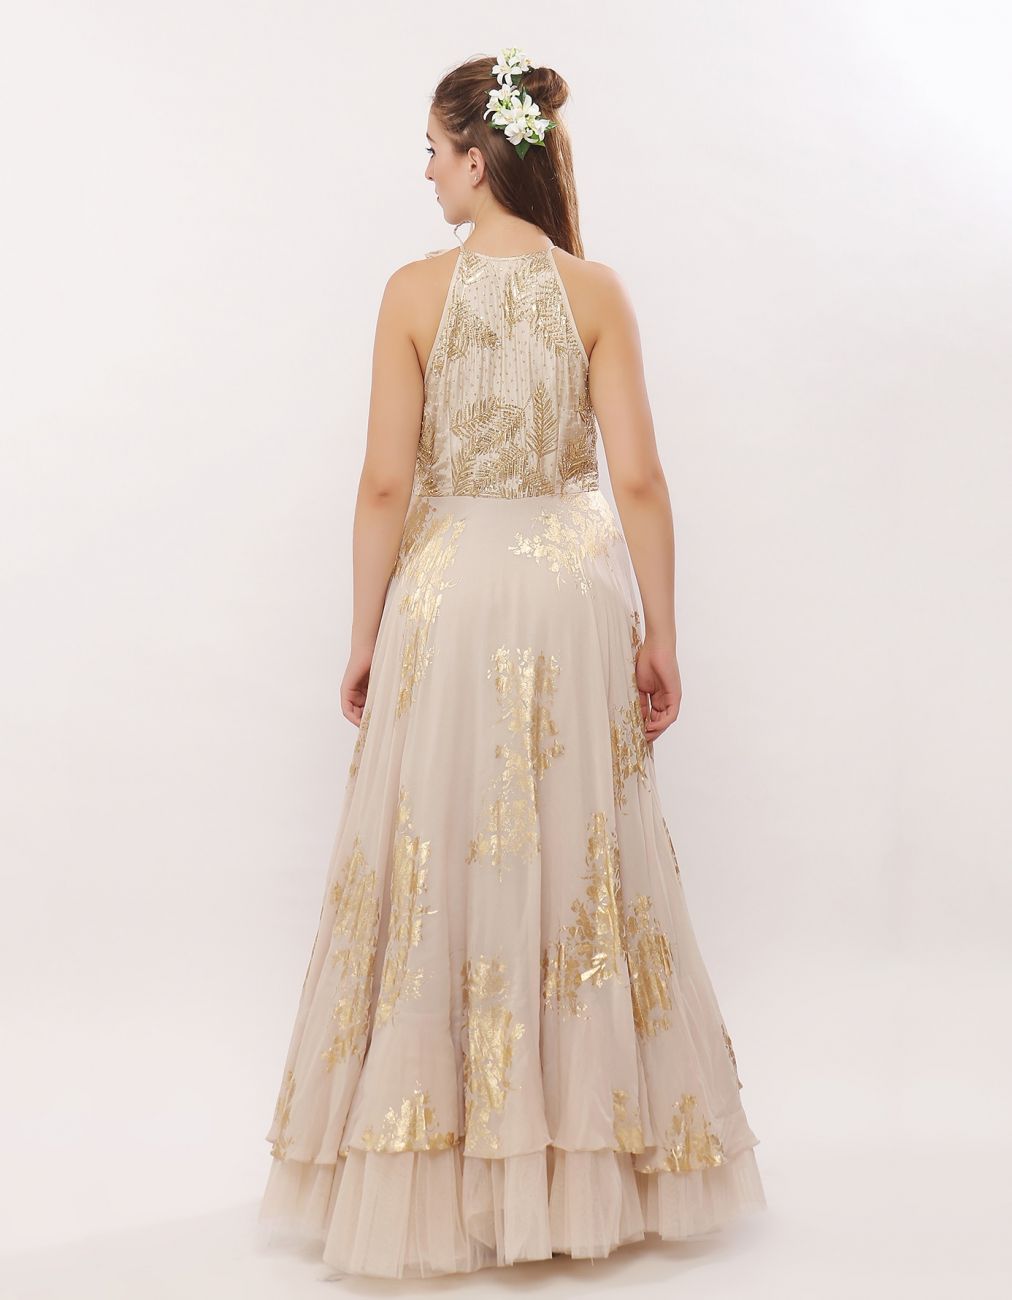 Ivory-Gold Leaf Motif Anarkali - Indian Clothing in Denver, CO, Aurora, CO, Boulder, CO, Fort Collins, CO, Colorado Springs, CO, Parker, CO, Highlands Ranch, CO, Cherry Creek, CO, Centennial, CO, and Longmont, CO. Nationwide shipping USA - India Fashion X